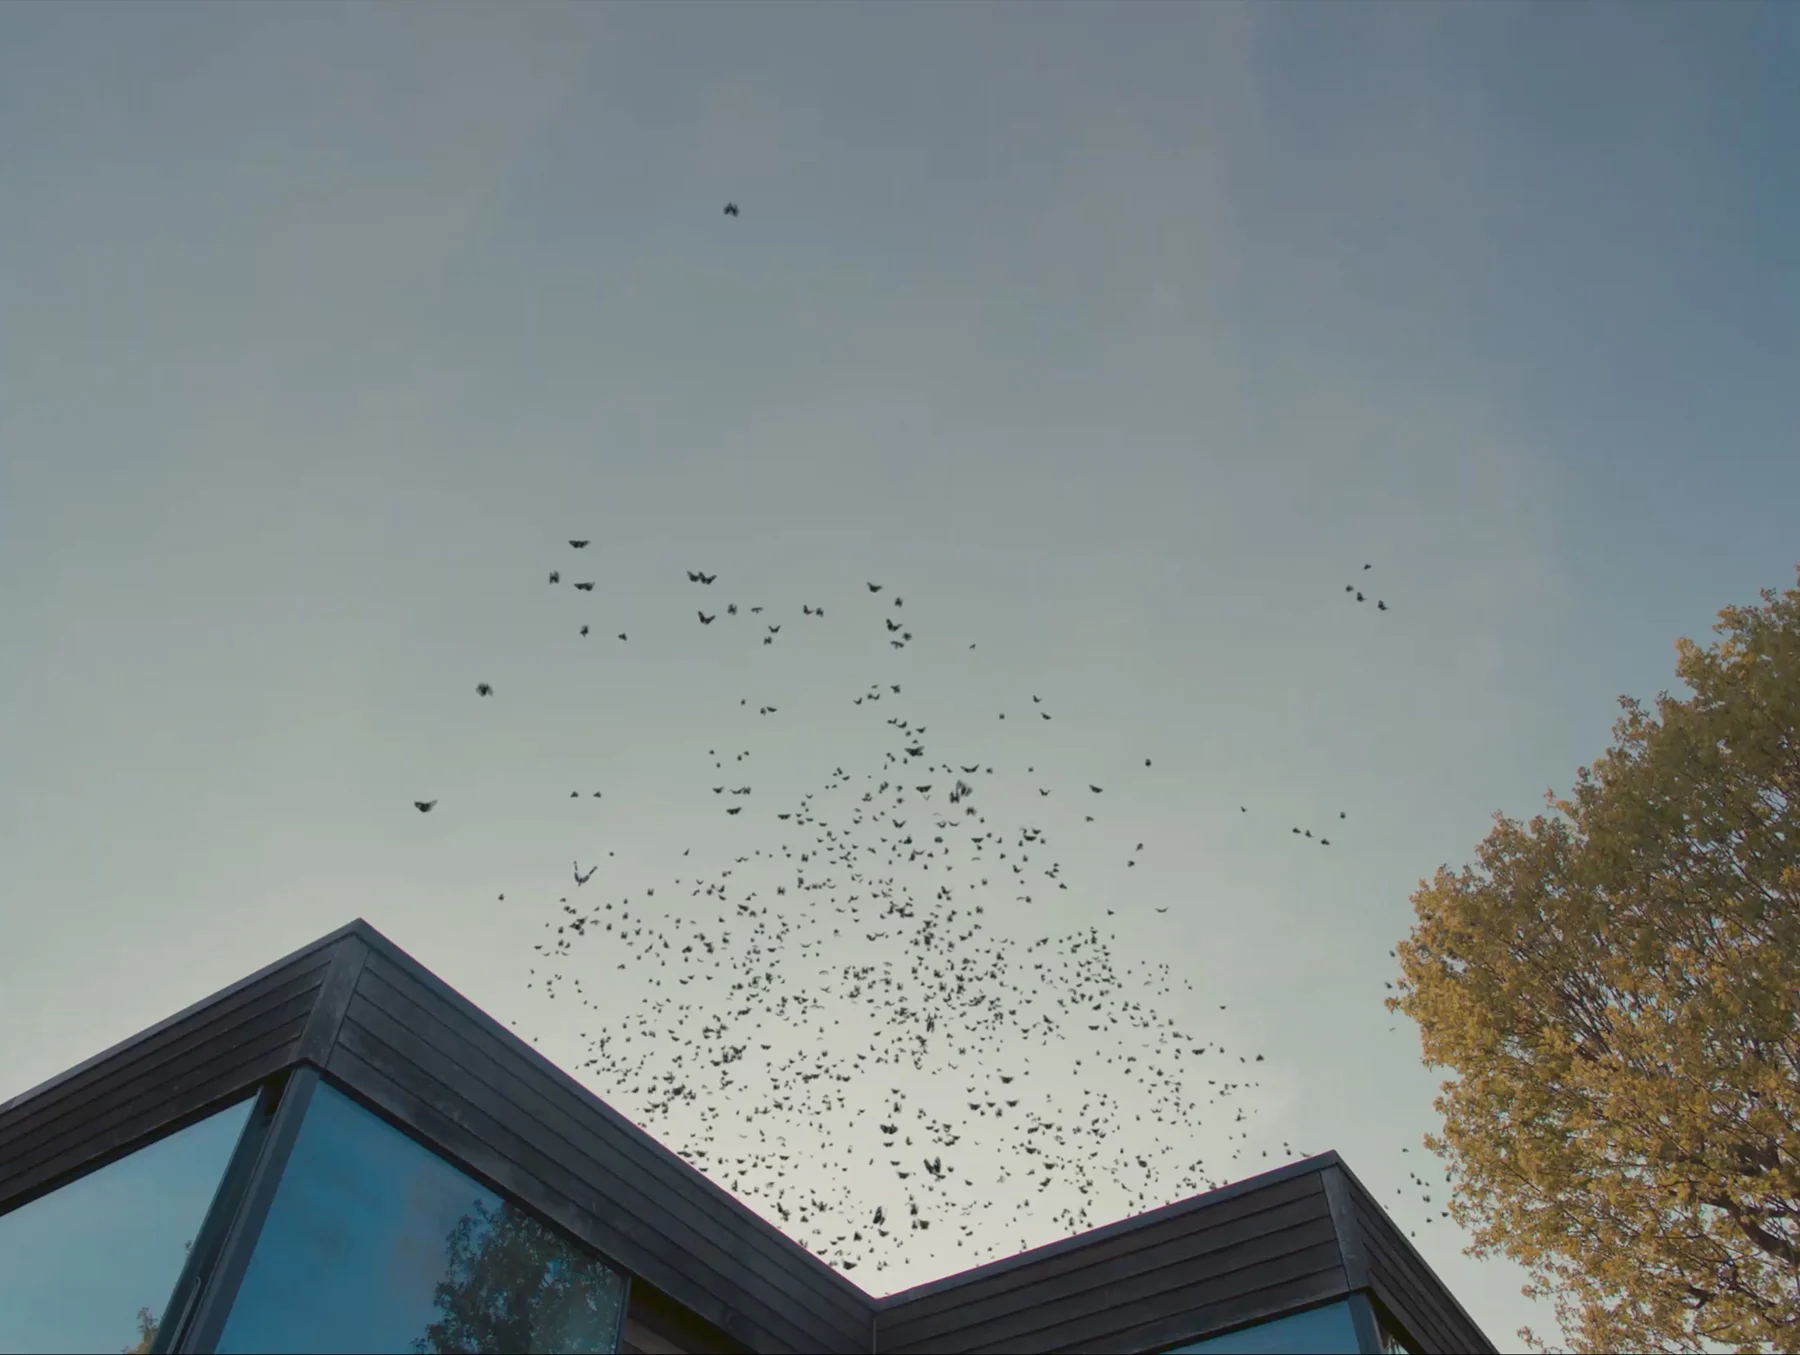 A short clip from Somayeh's film “Skin of Water” showing hundreds of butterflies flying towards the camera against a clear blue sky.